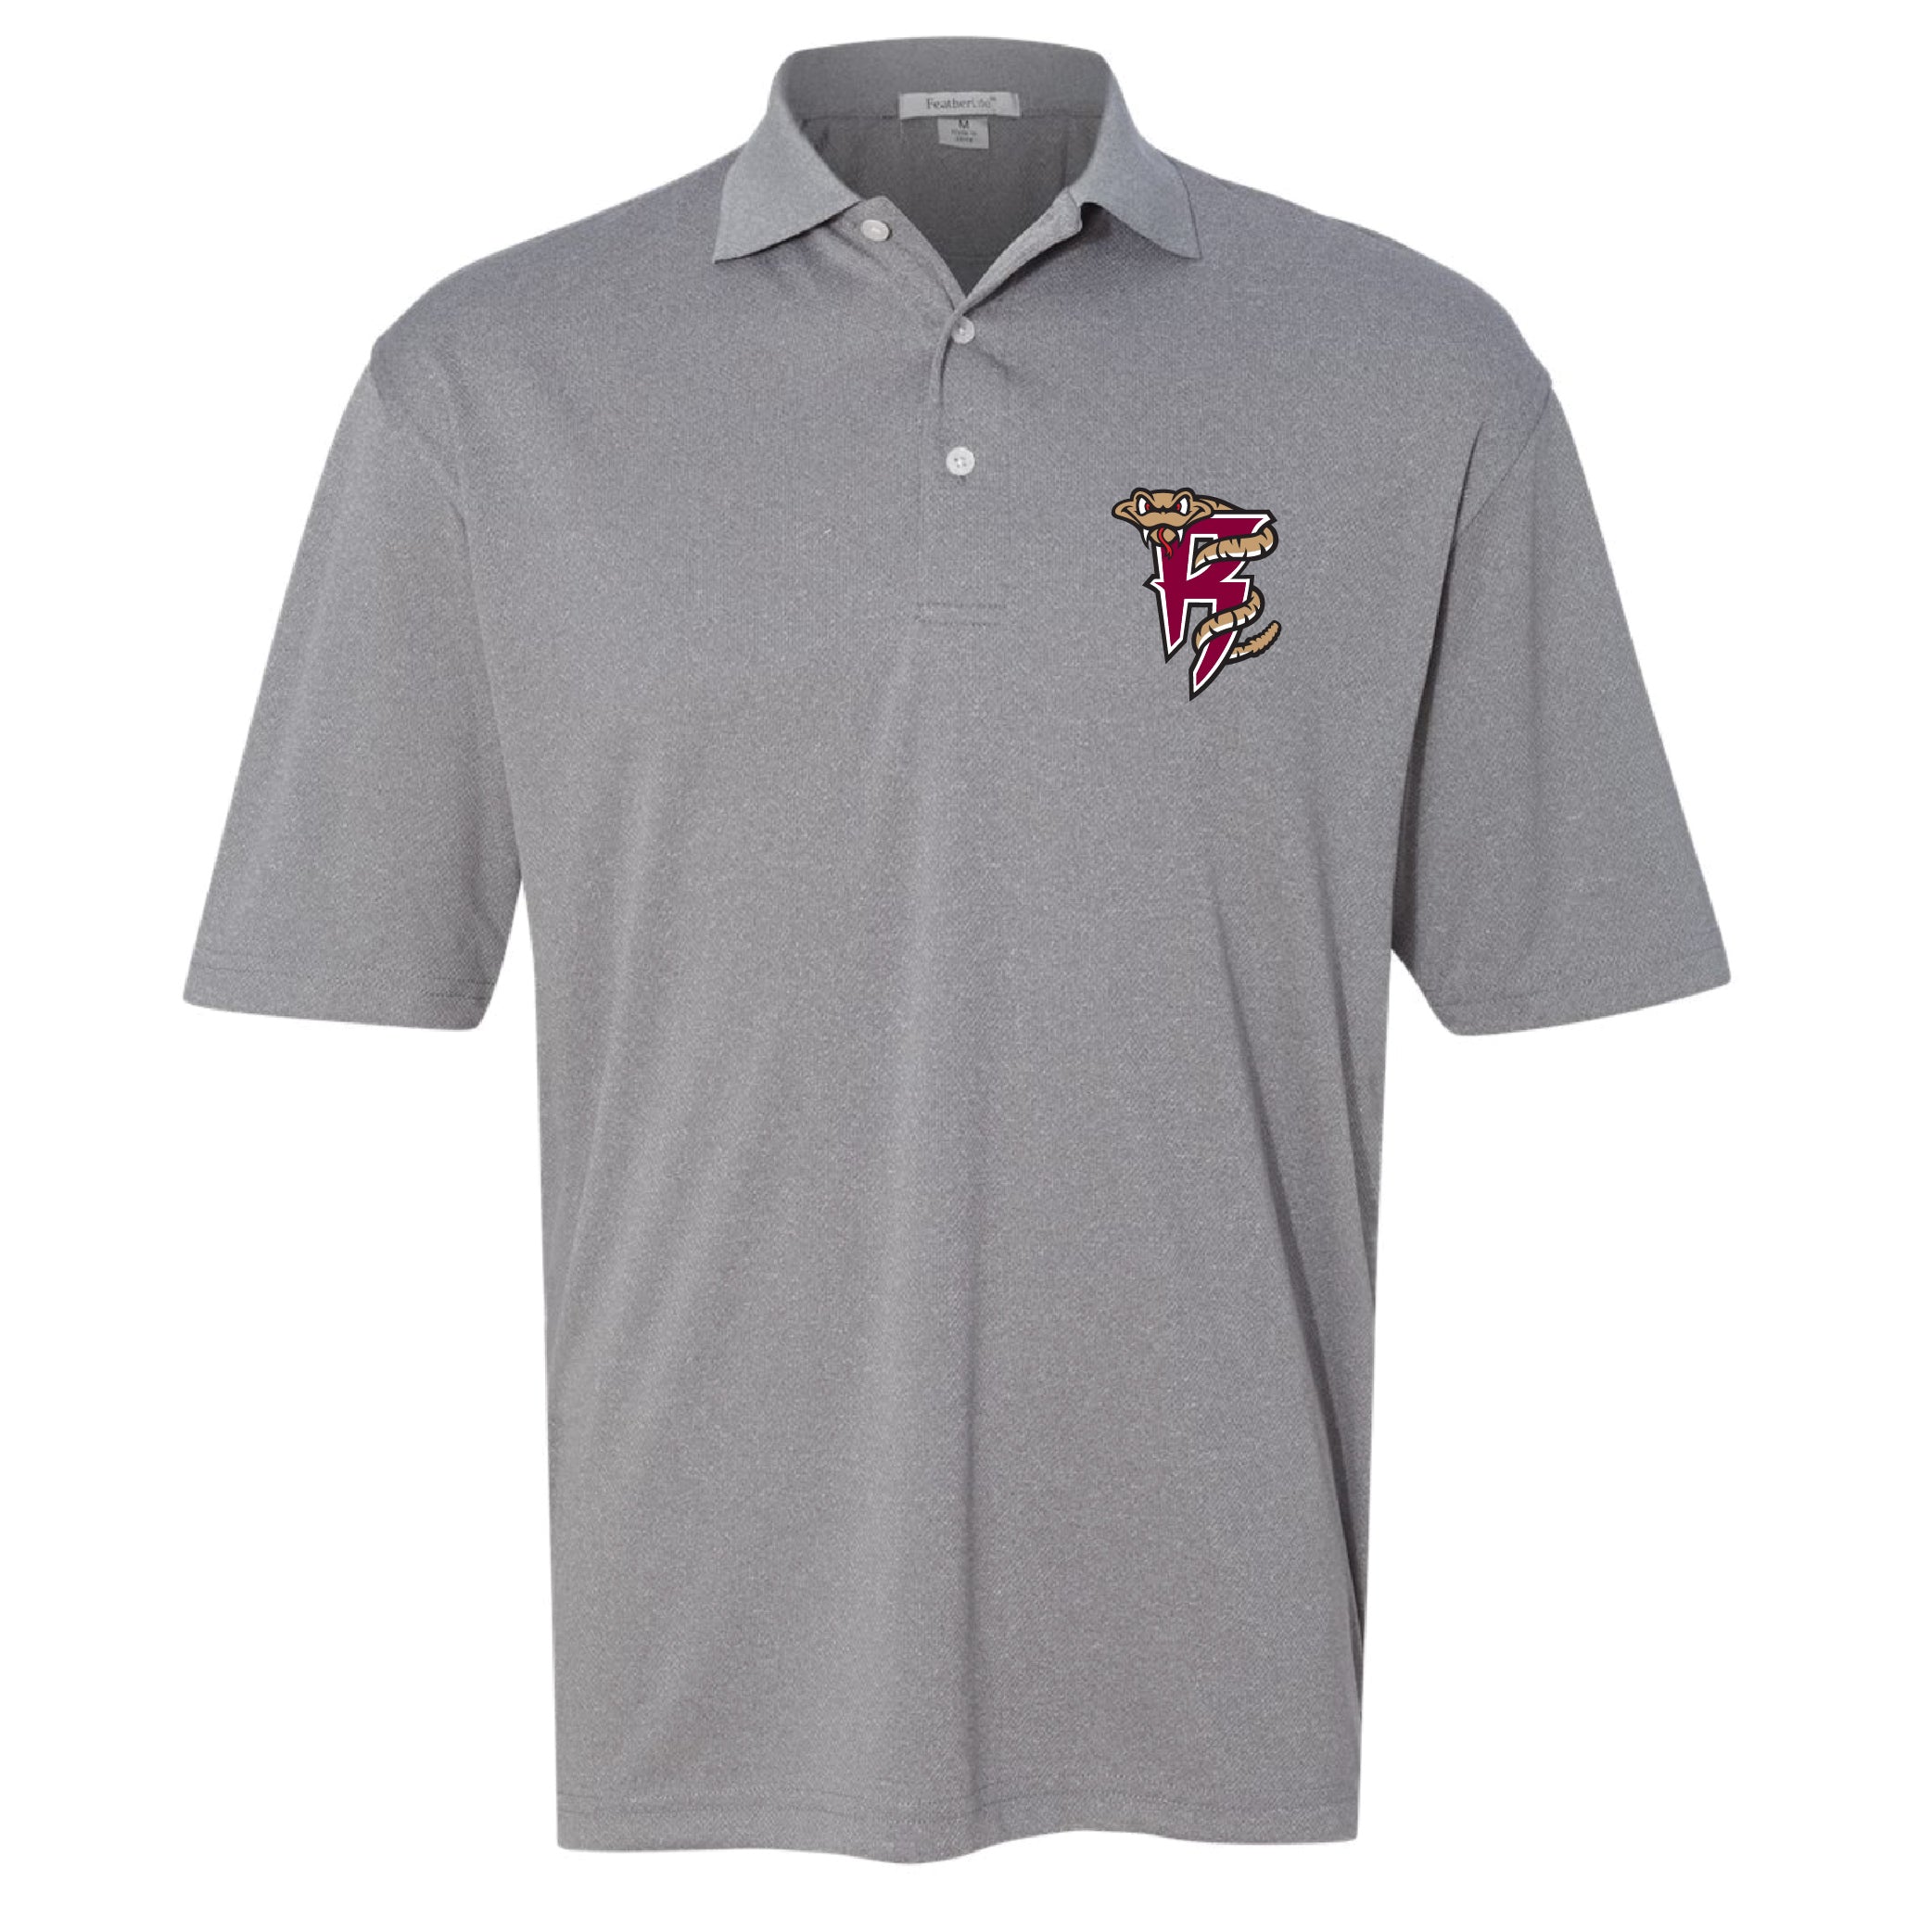 Wisconsin Timber Rattlers Official Store